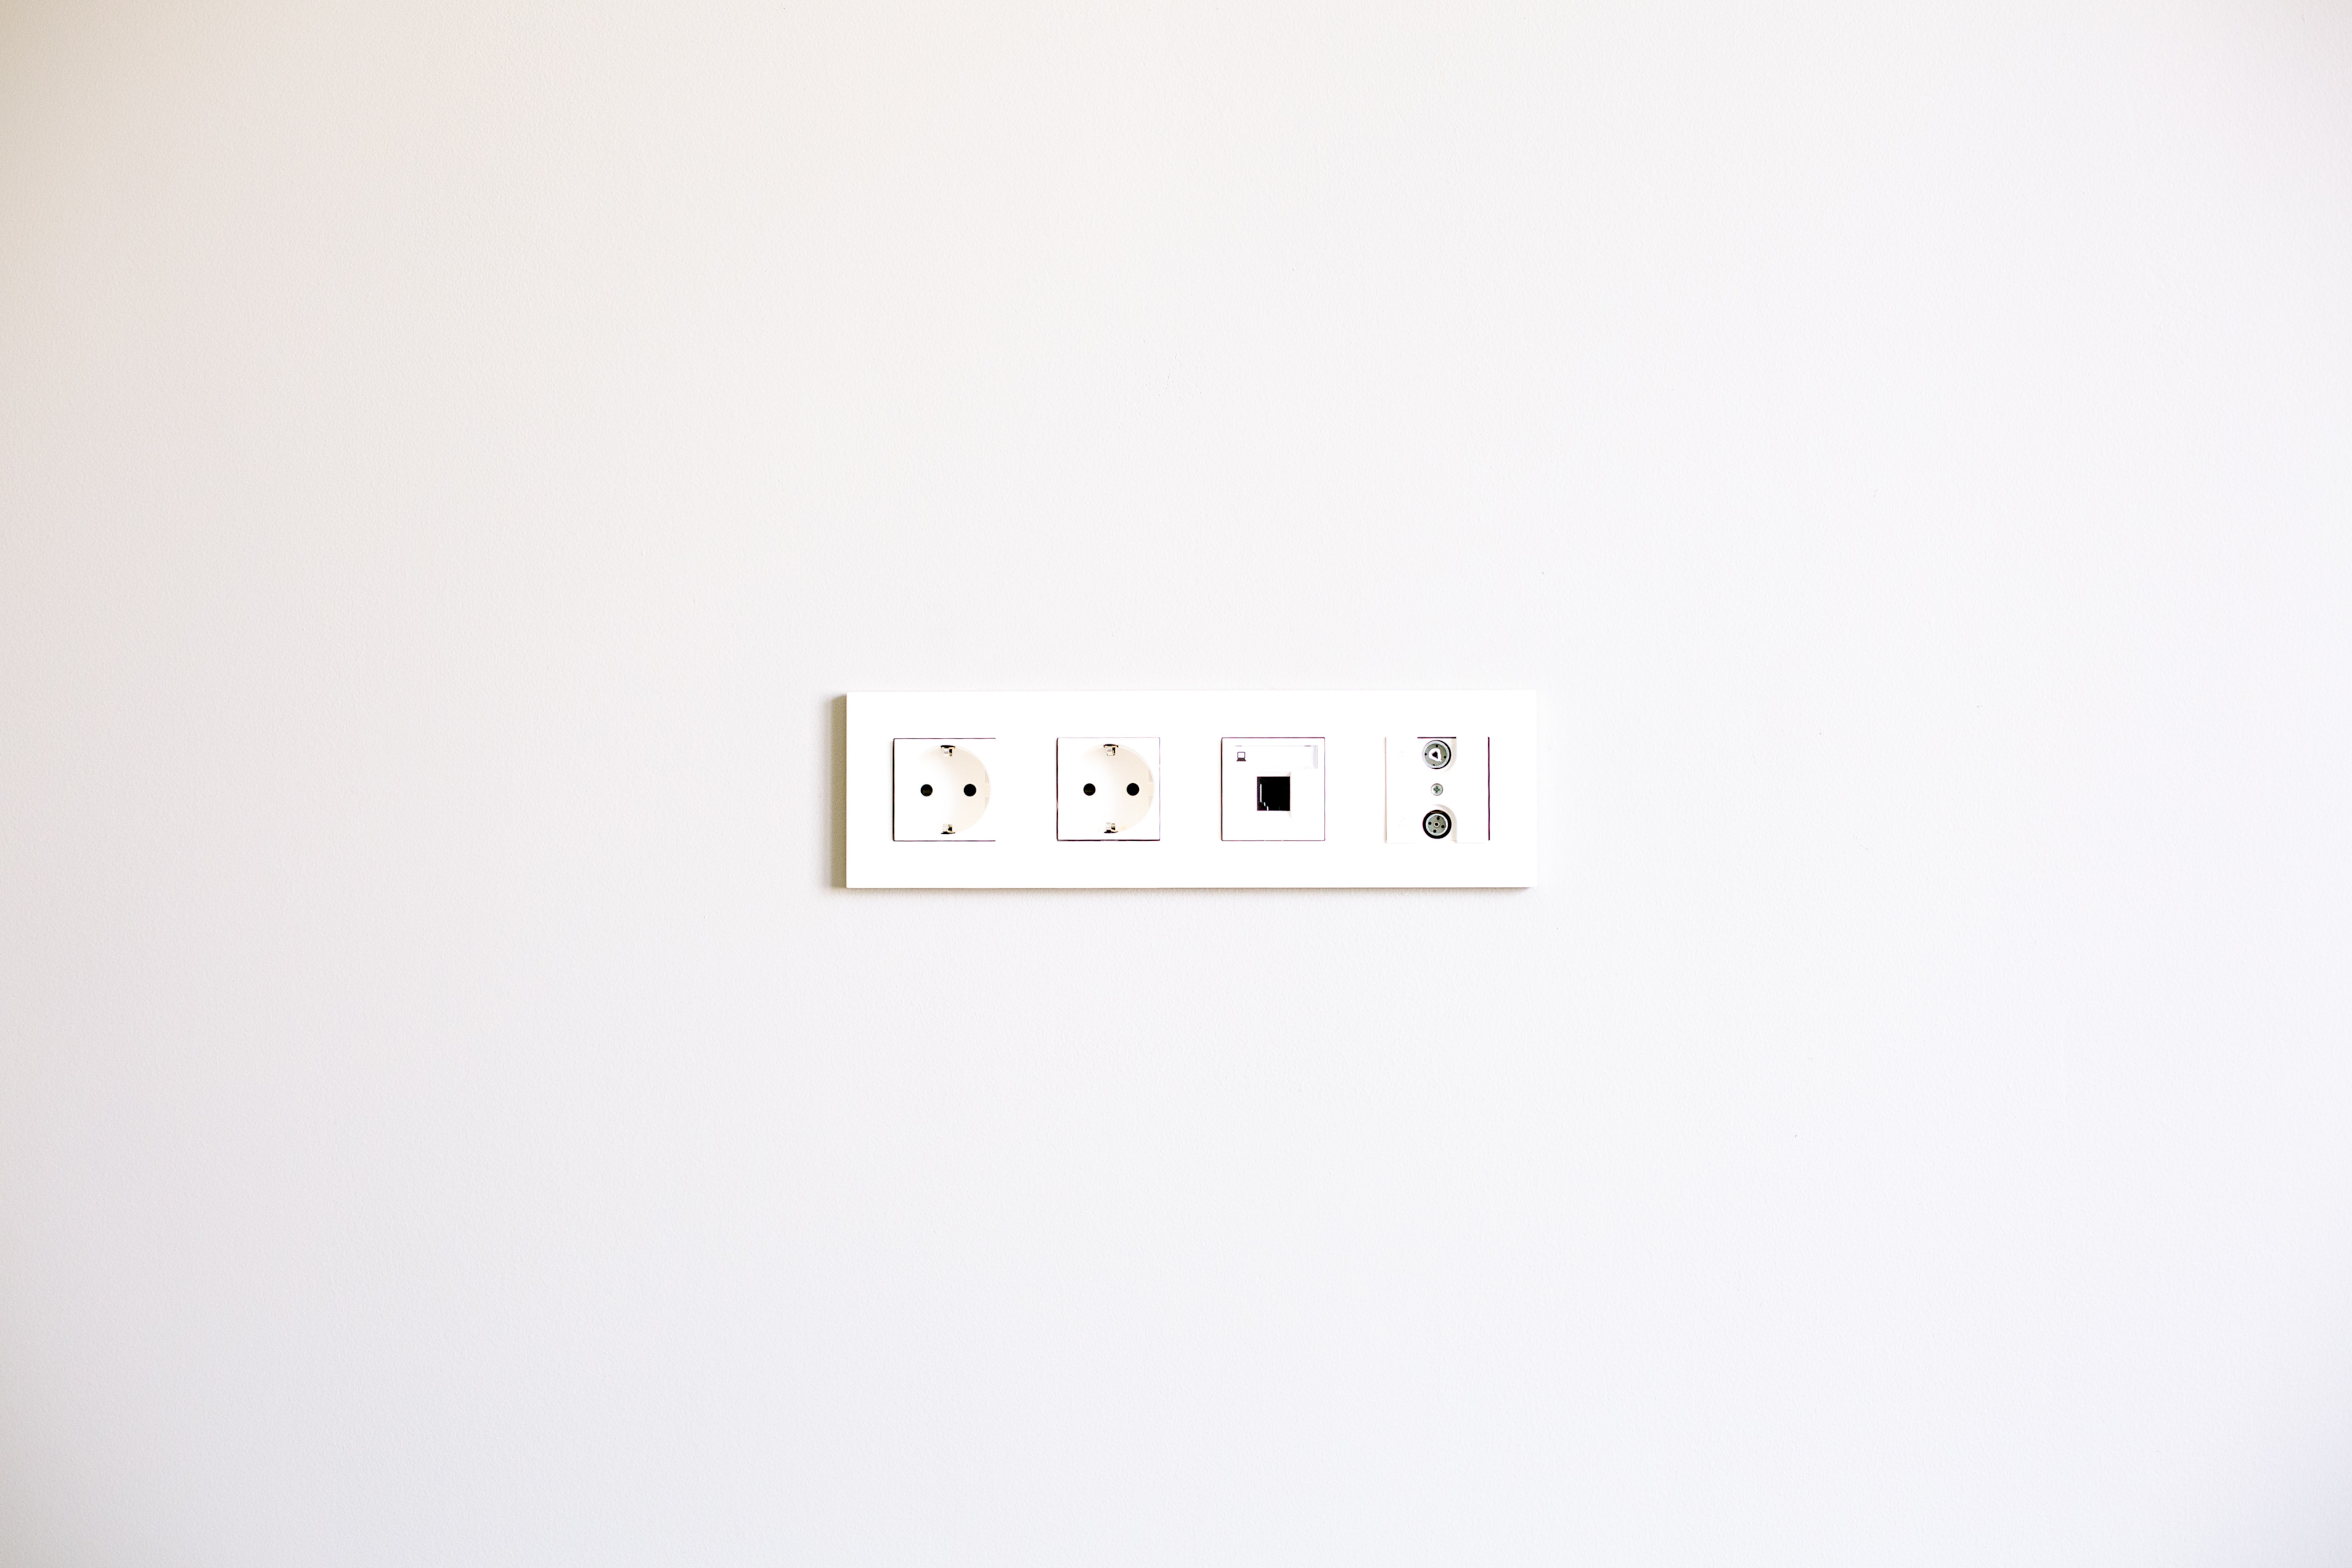 3 prong outlets